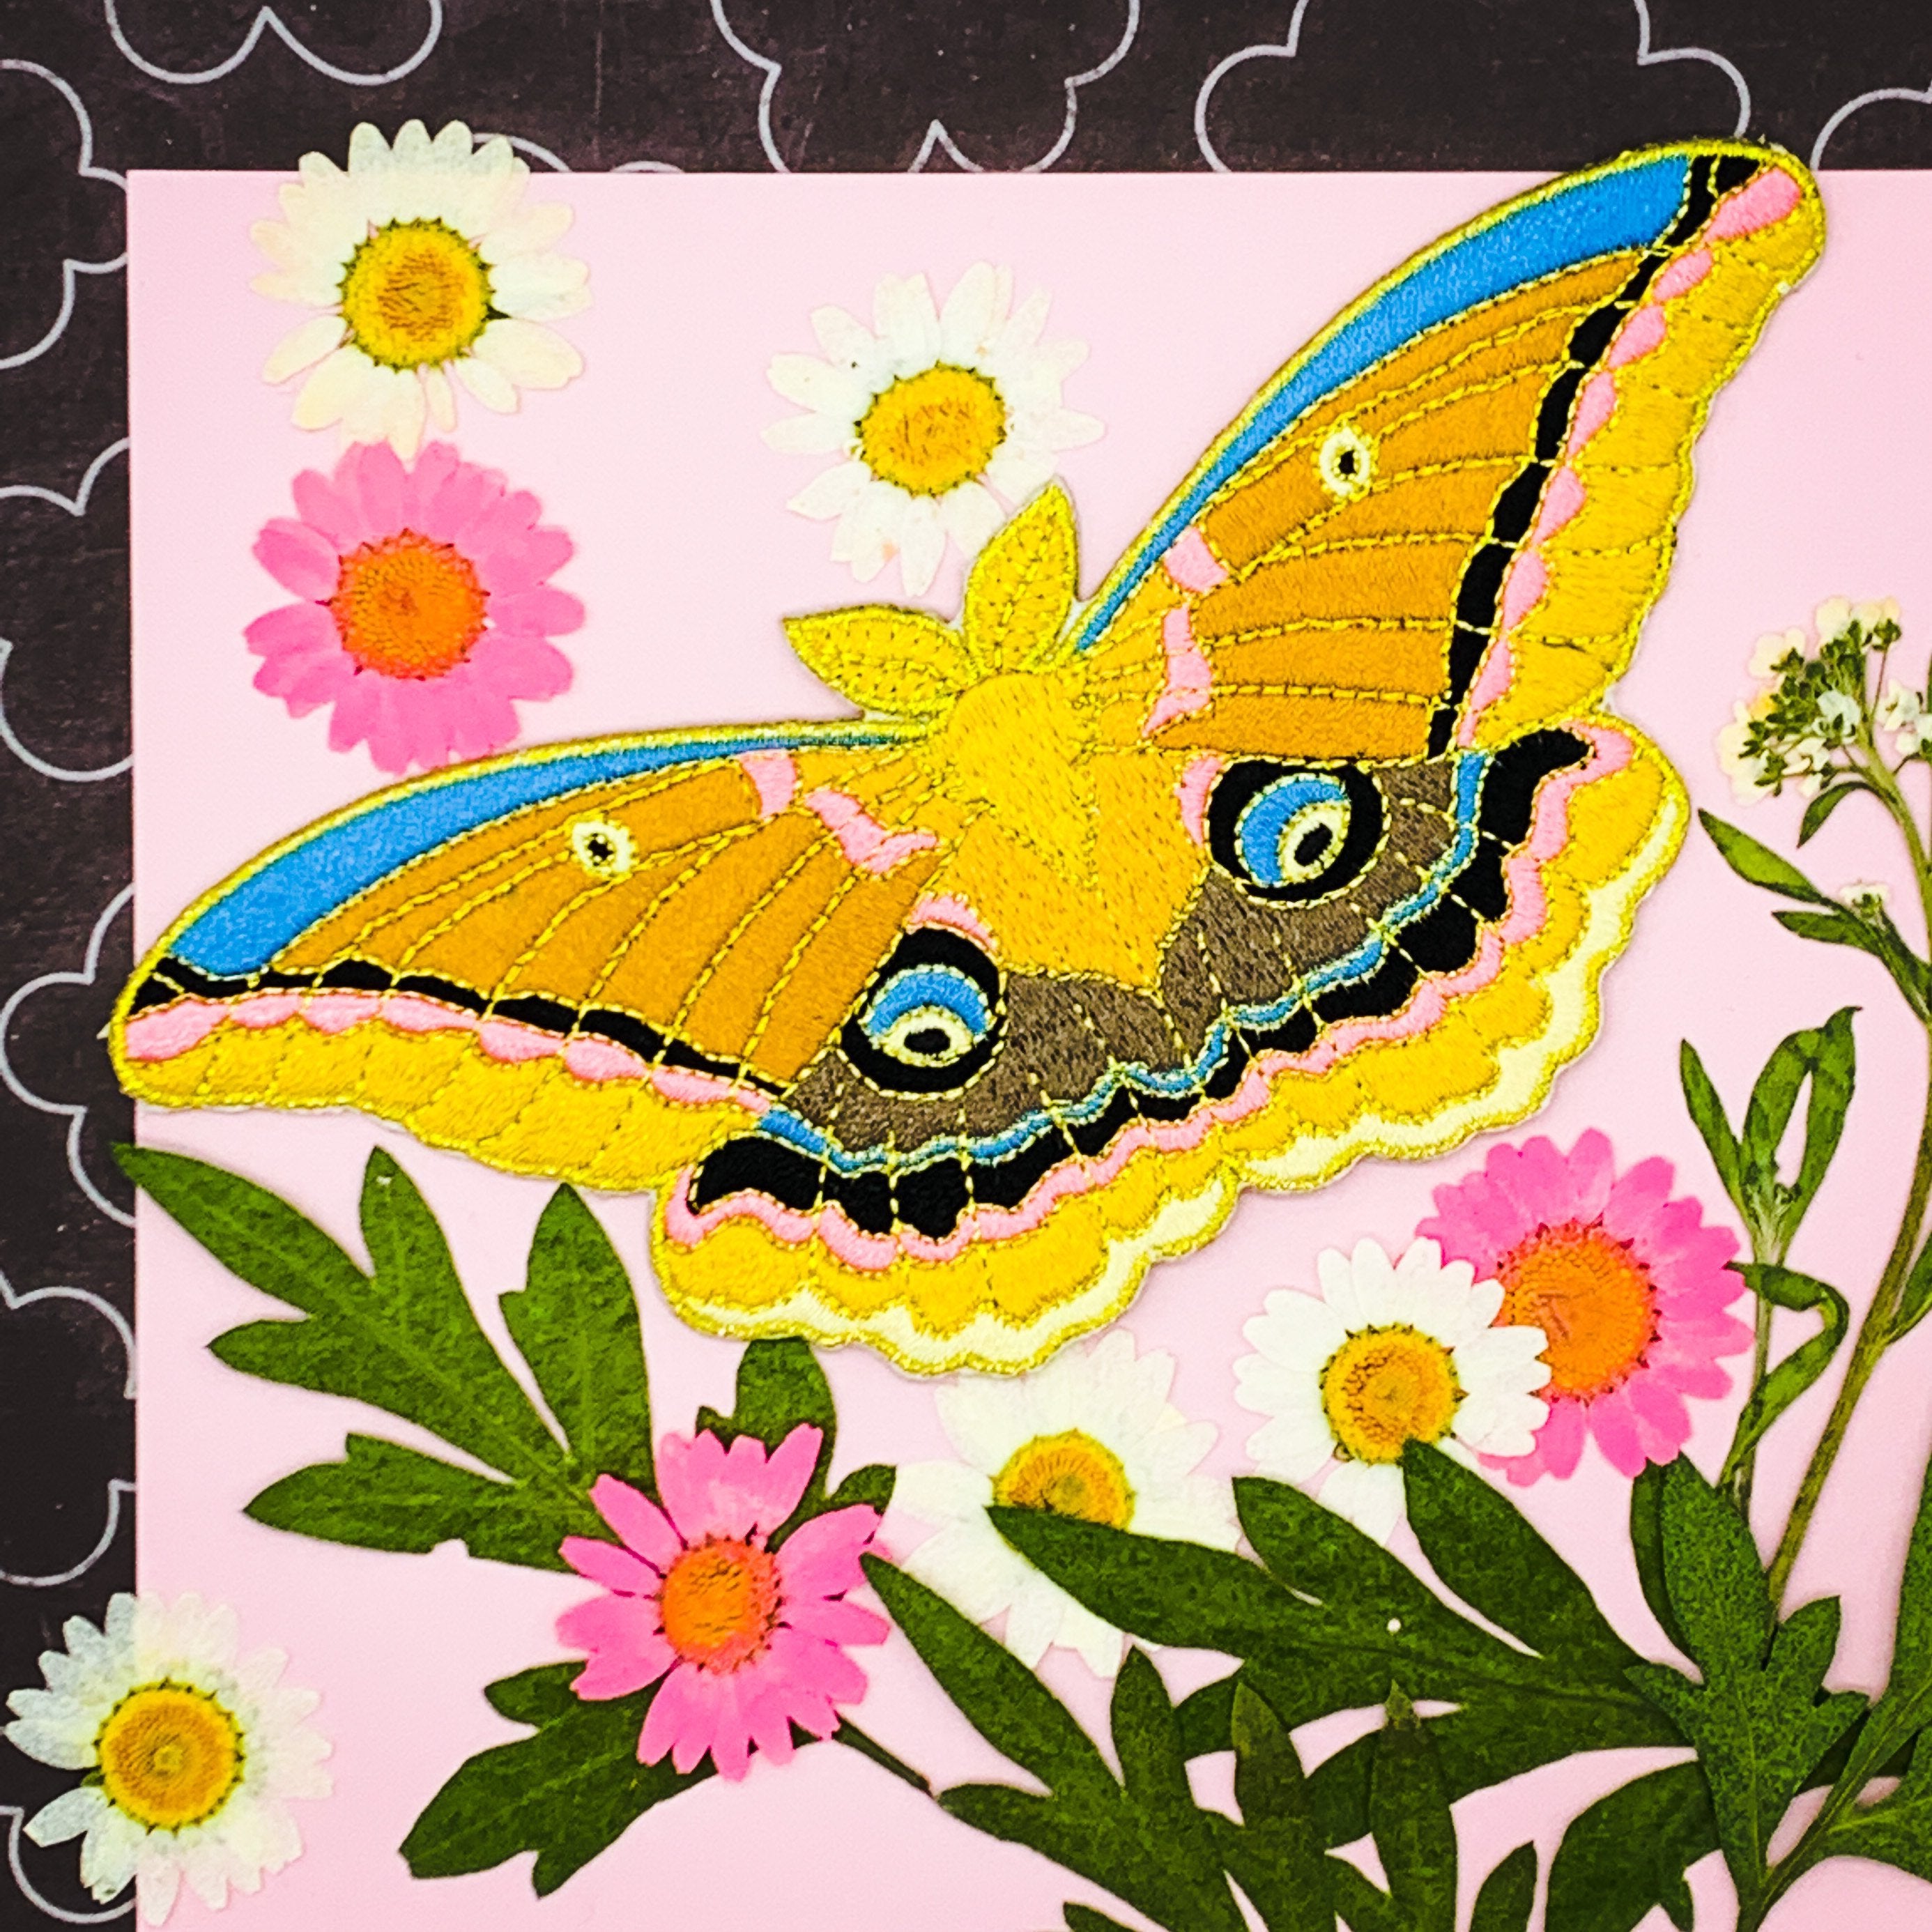 A soft embroidered patch of a polyphemus moth, laid out on decorative paper with colorful dried flowers.